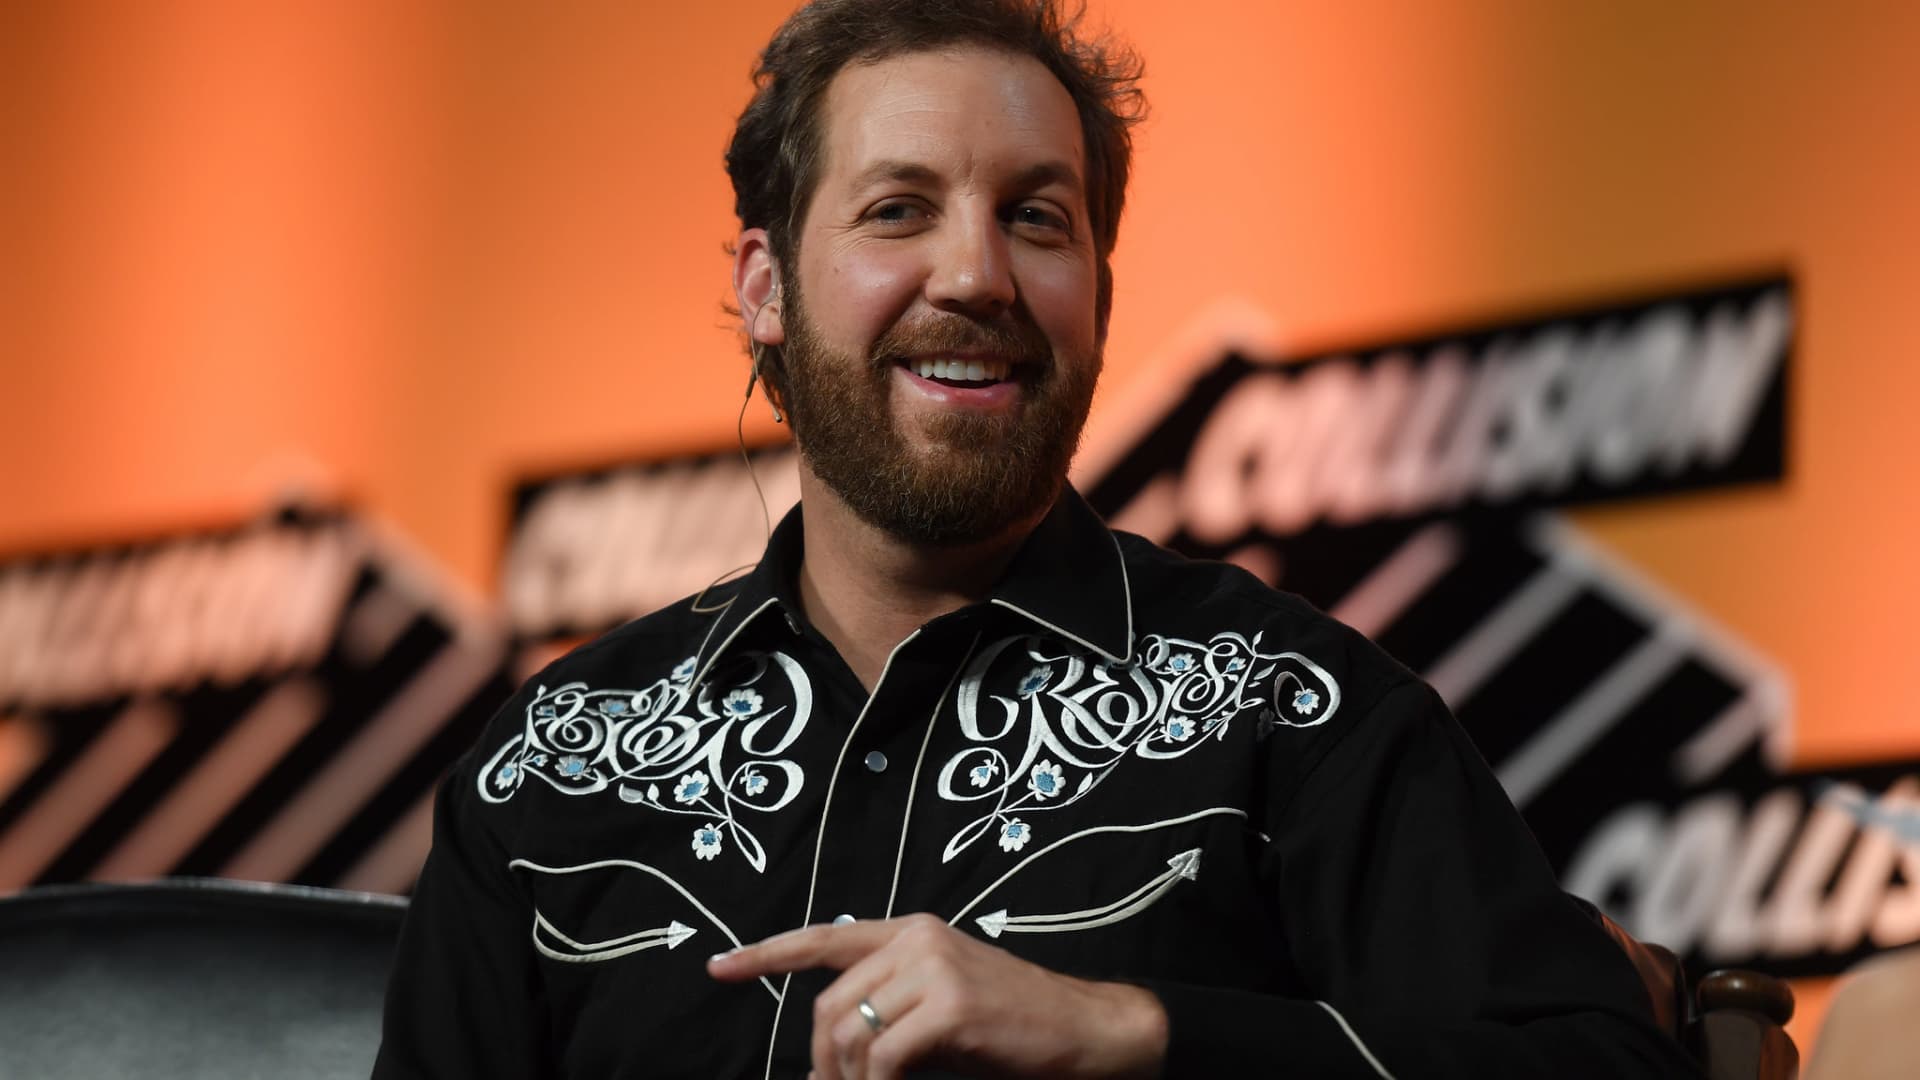 Twitter early investor Chris Sacca says Elon Musk is ‘alone right now and winging this’